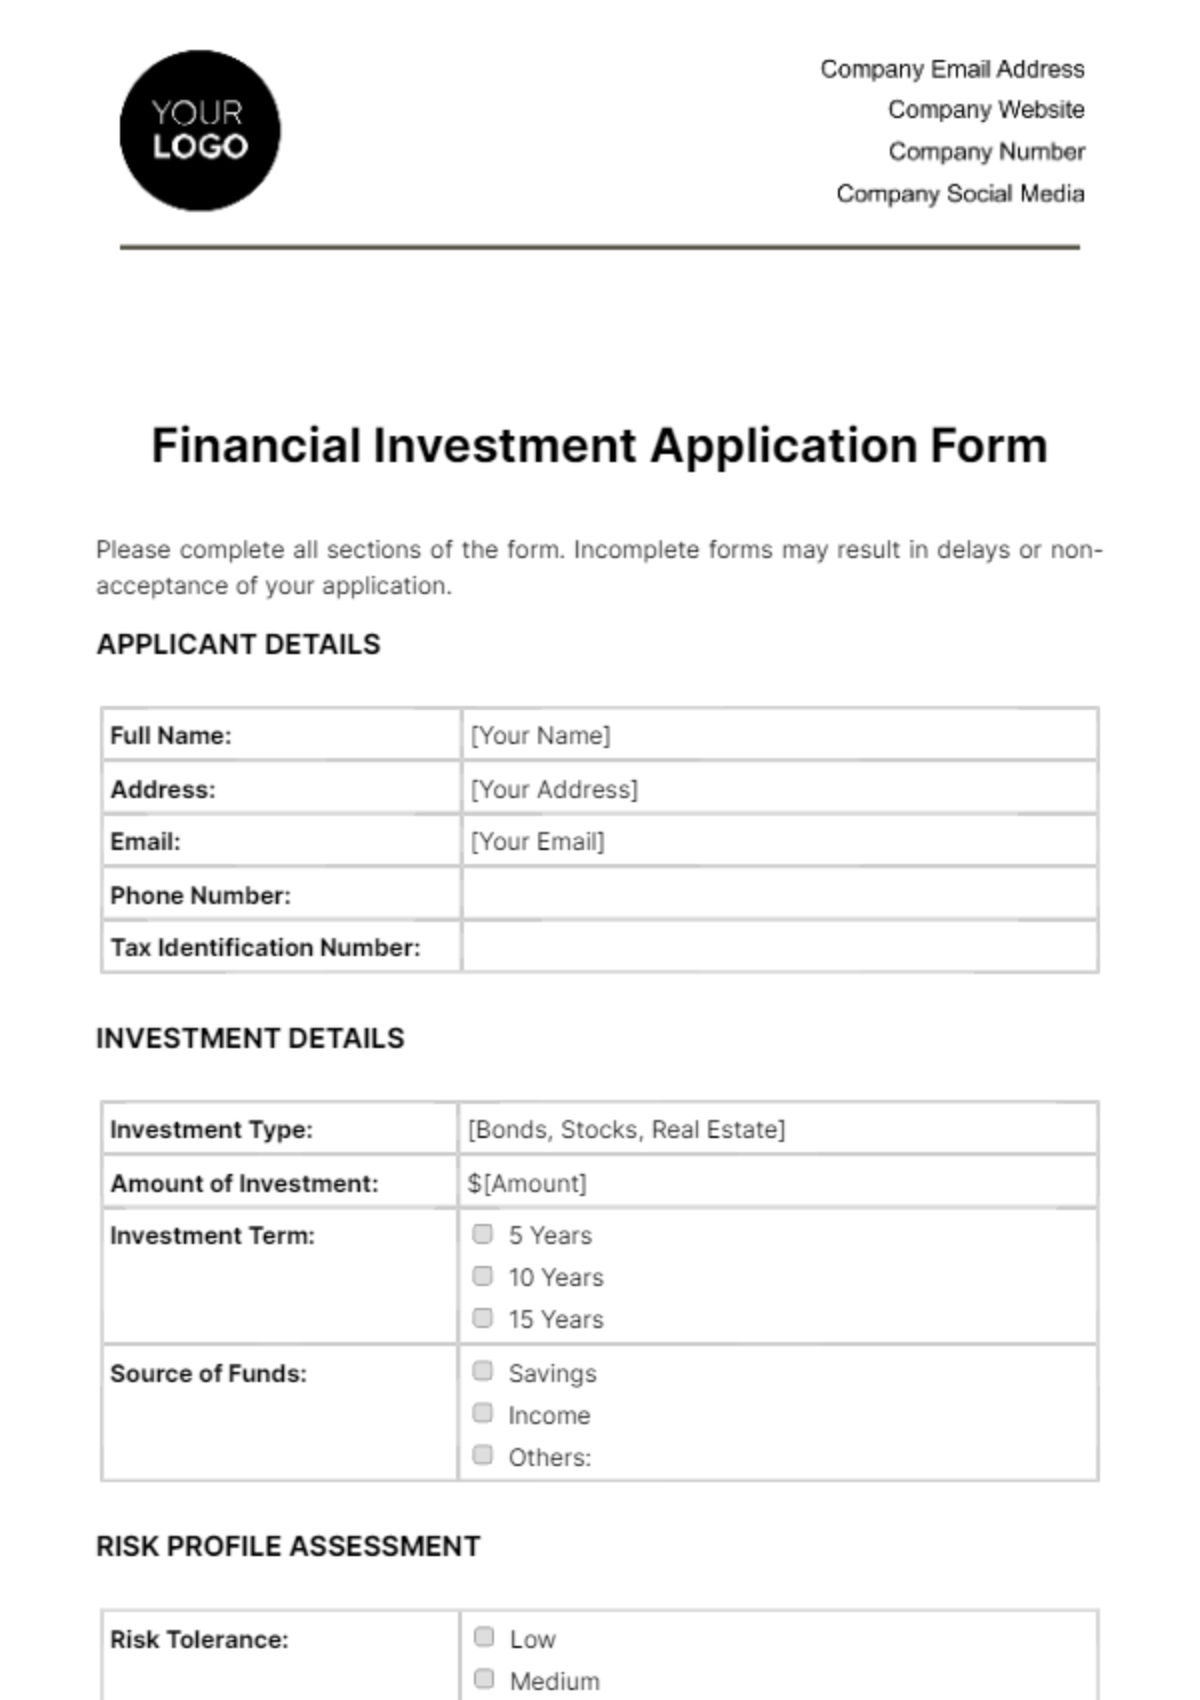 Financial Investment Application Form Template